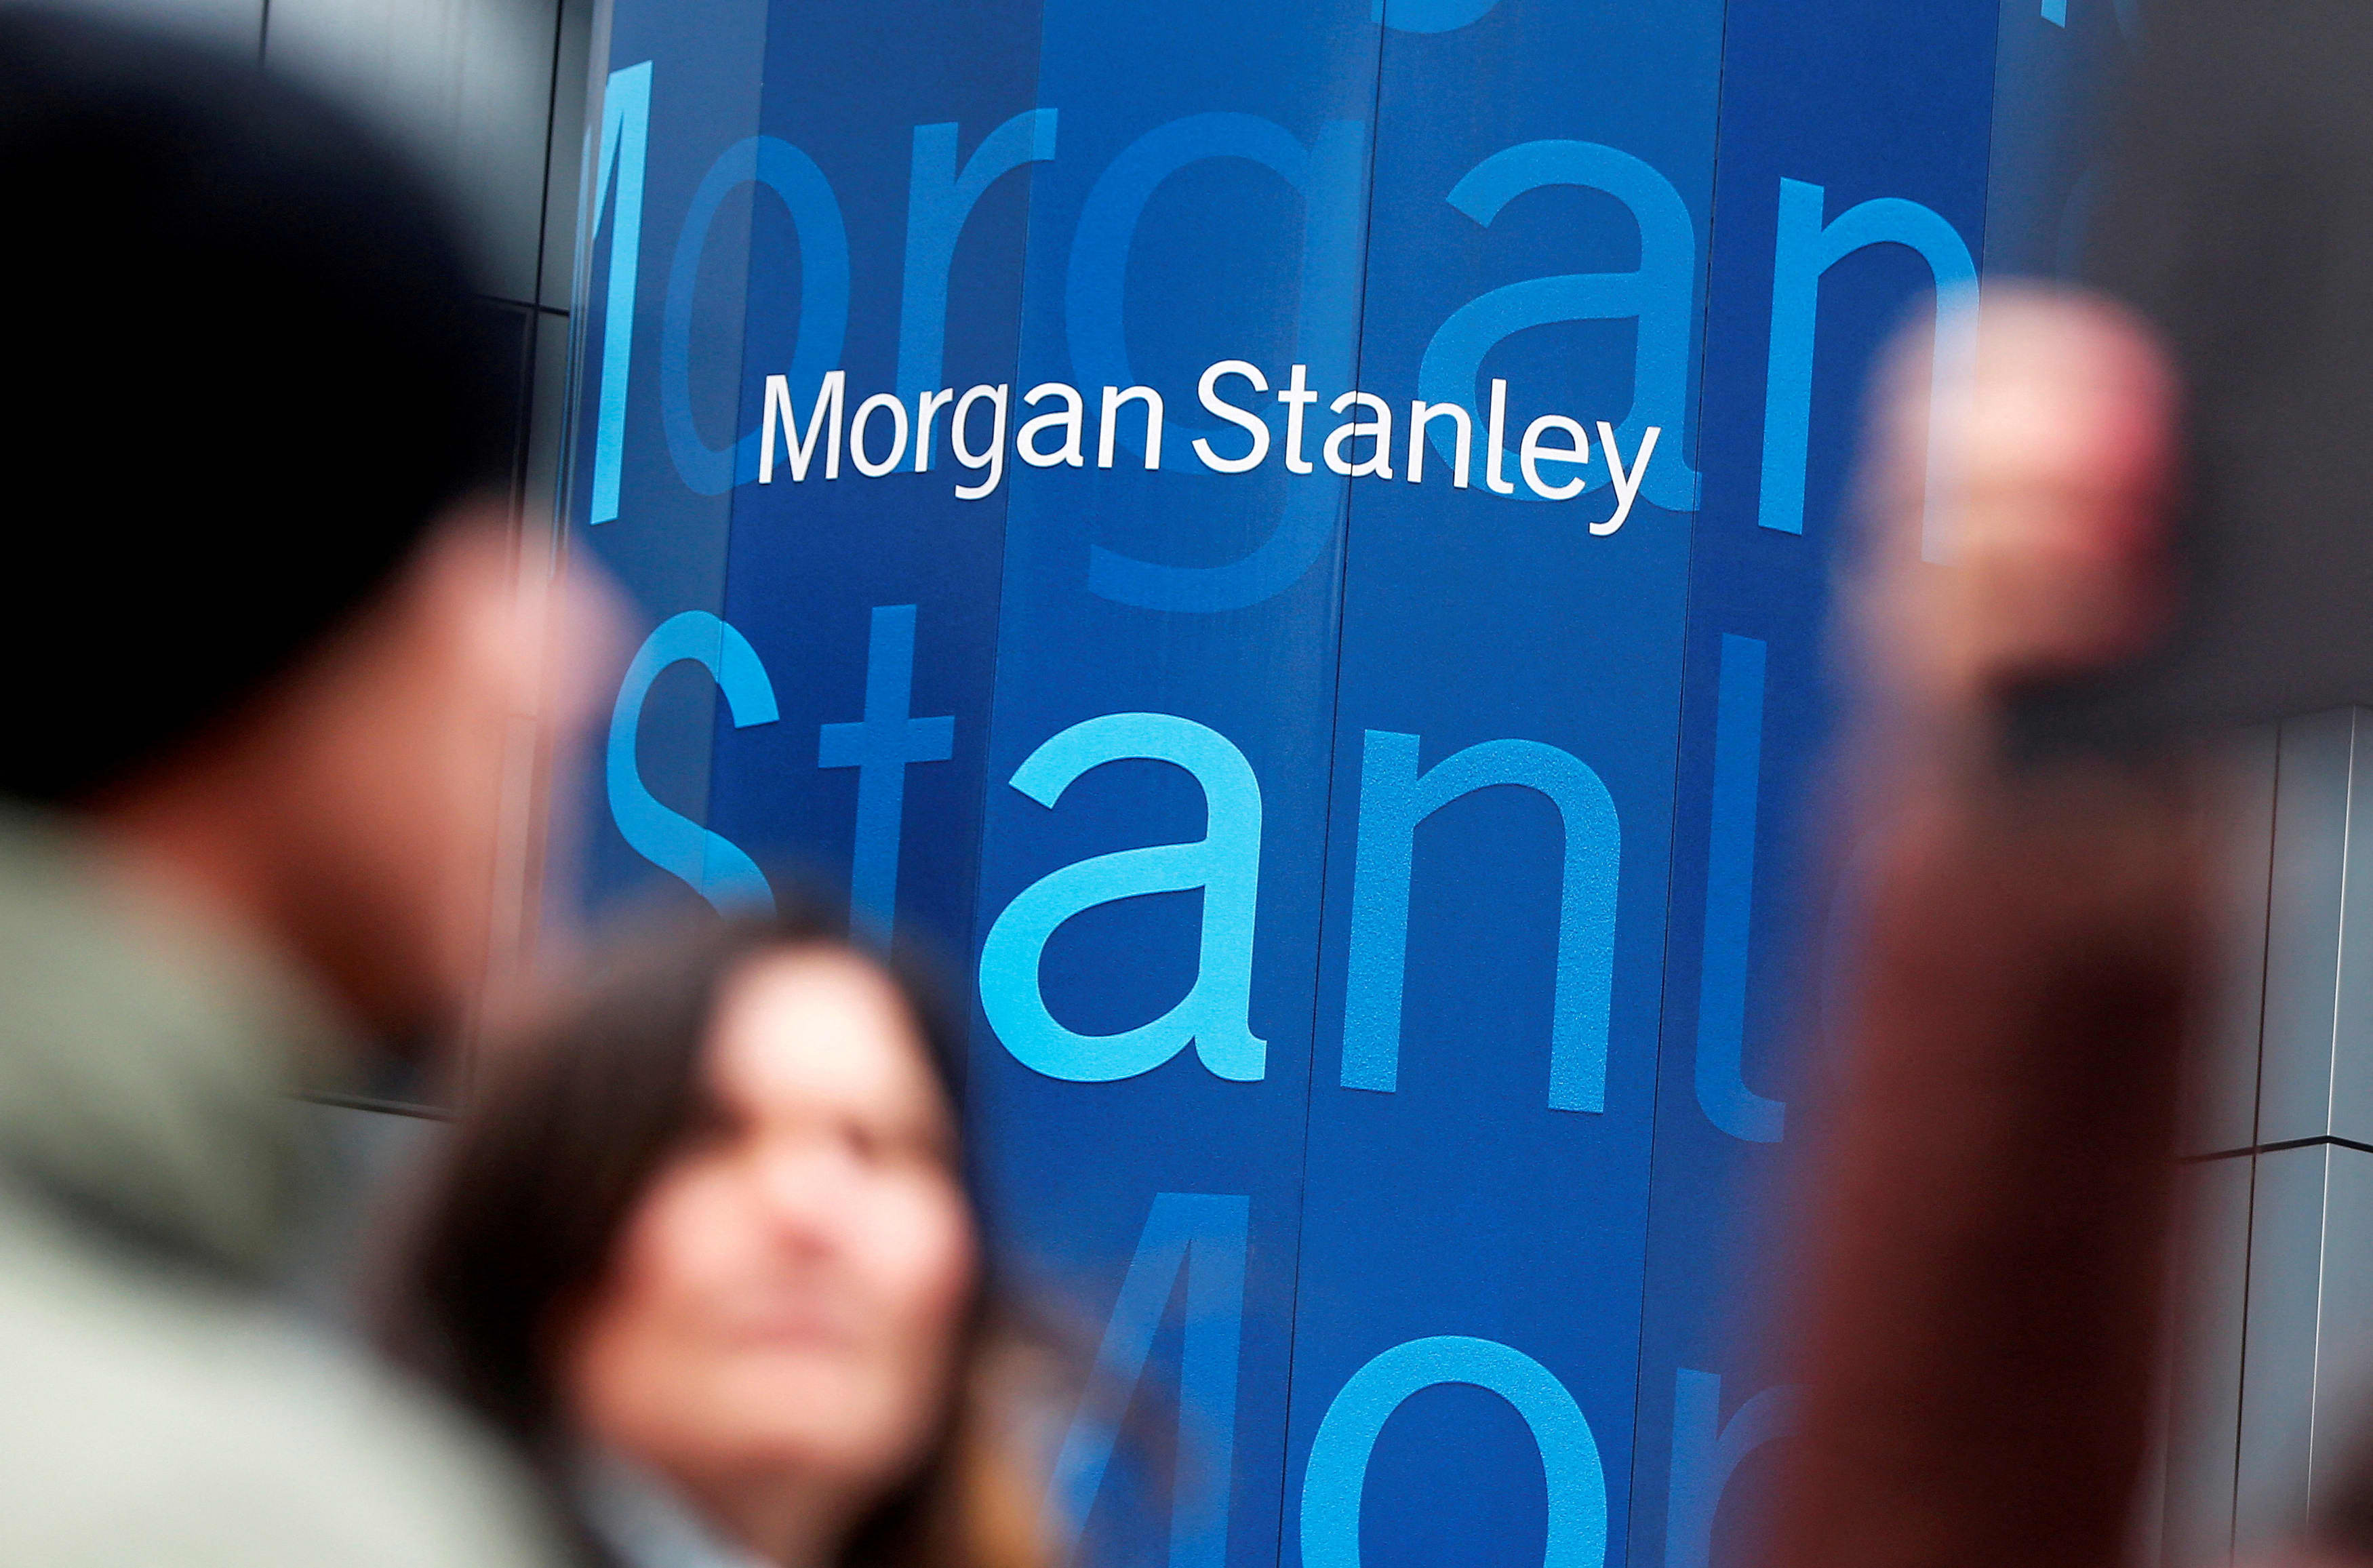 Morgan Stanley can boost some of its long-dormant businesses thanks to technology